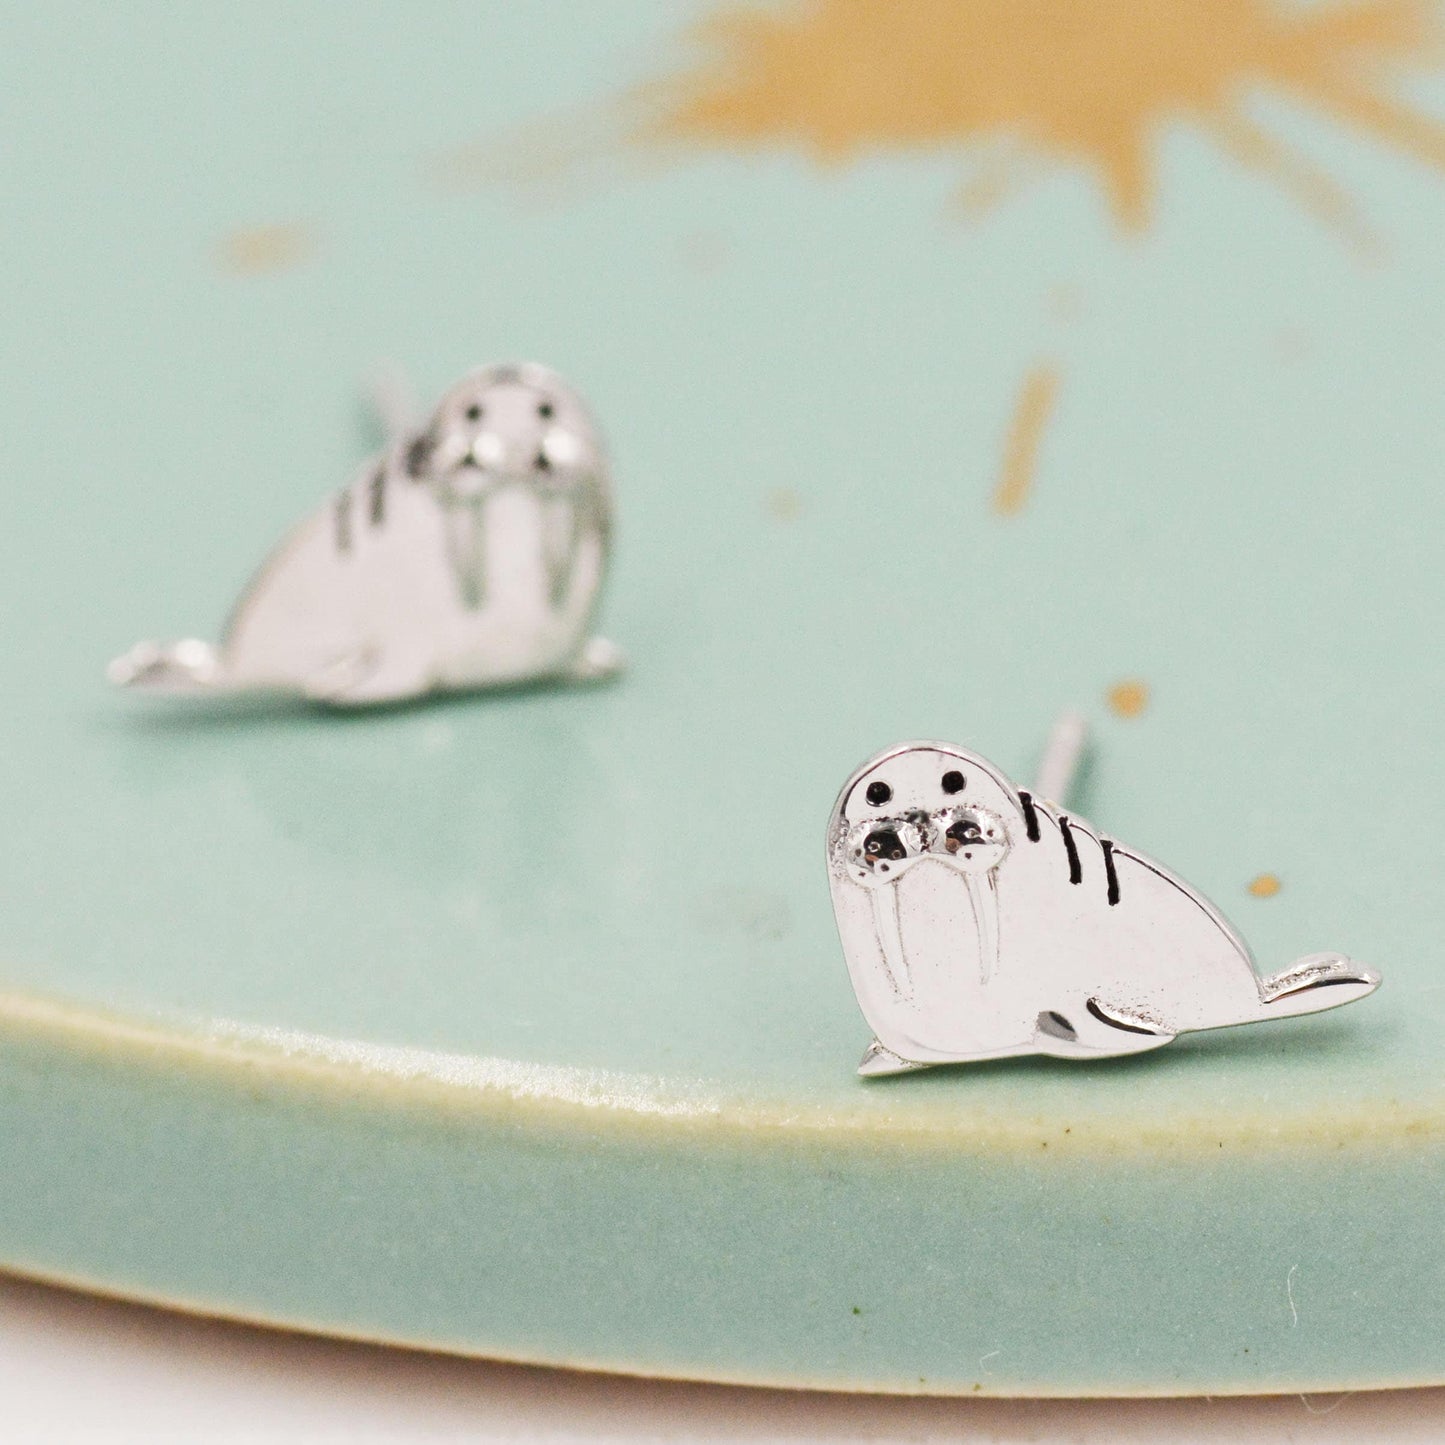 Tiny Walrus Stud Earrings in Sterling Silver - Animal Stud Earrings - Ocean Animal Earrings  - Cute,  Fun, Whimsical